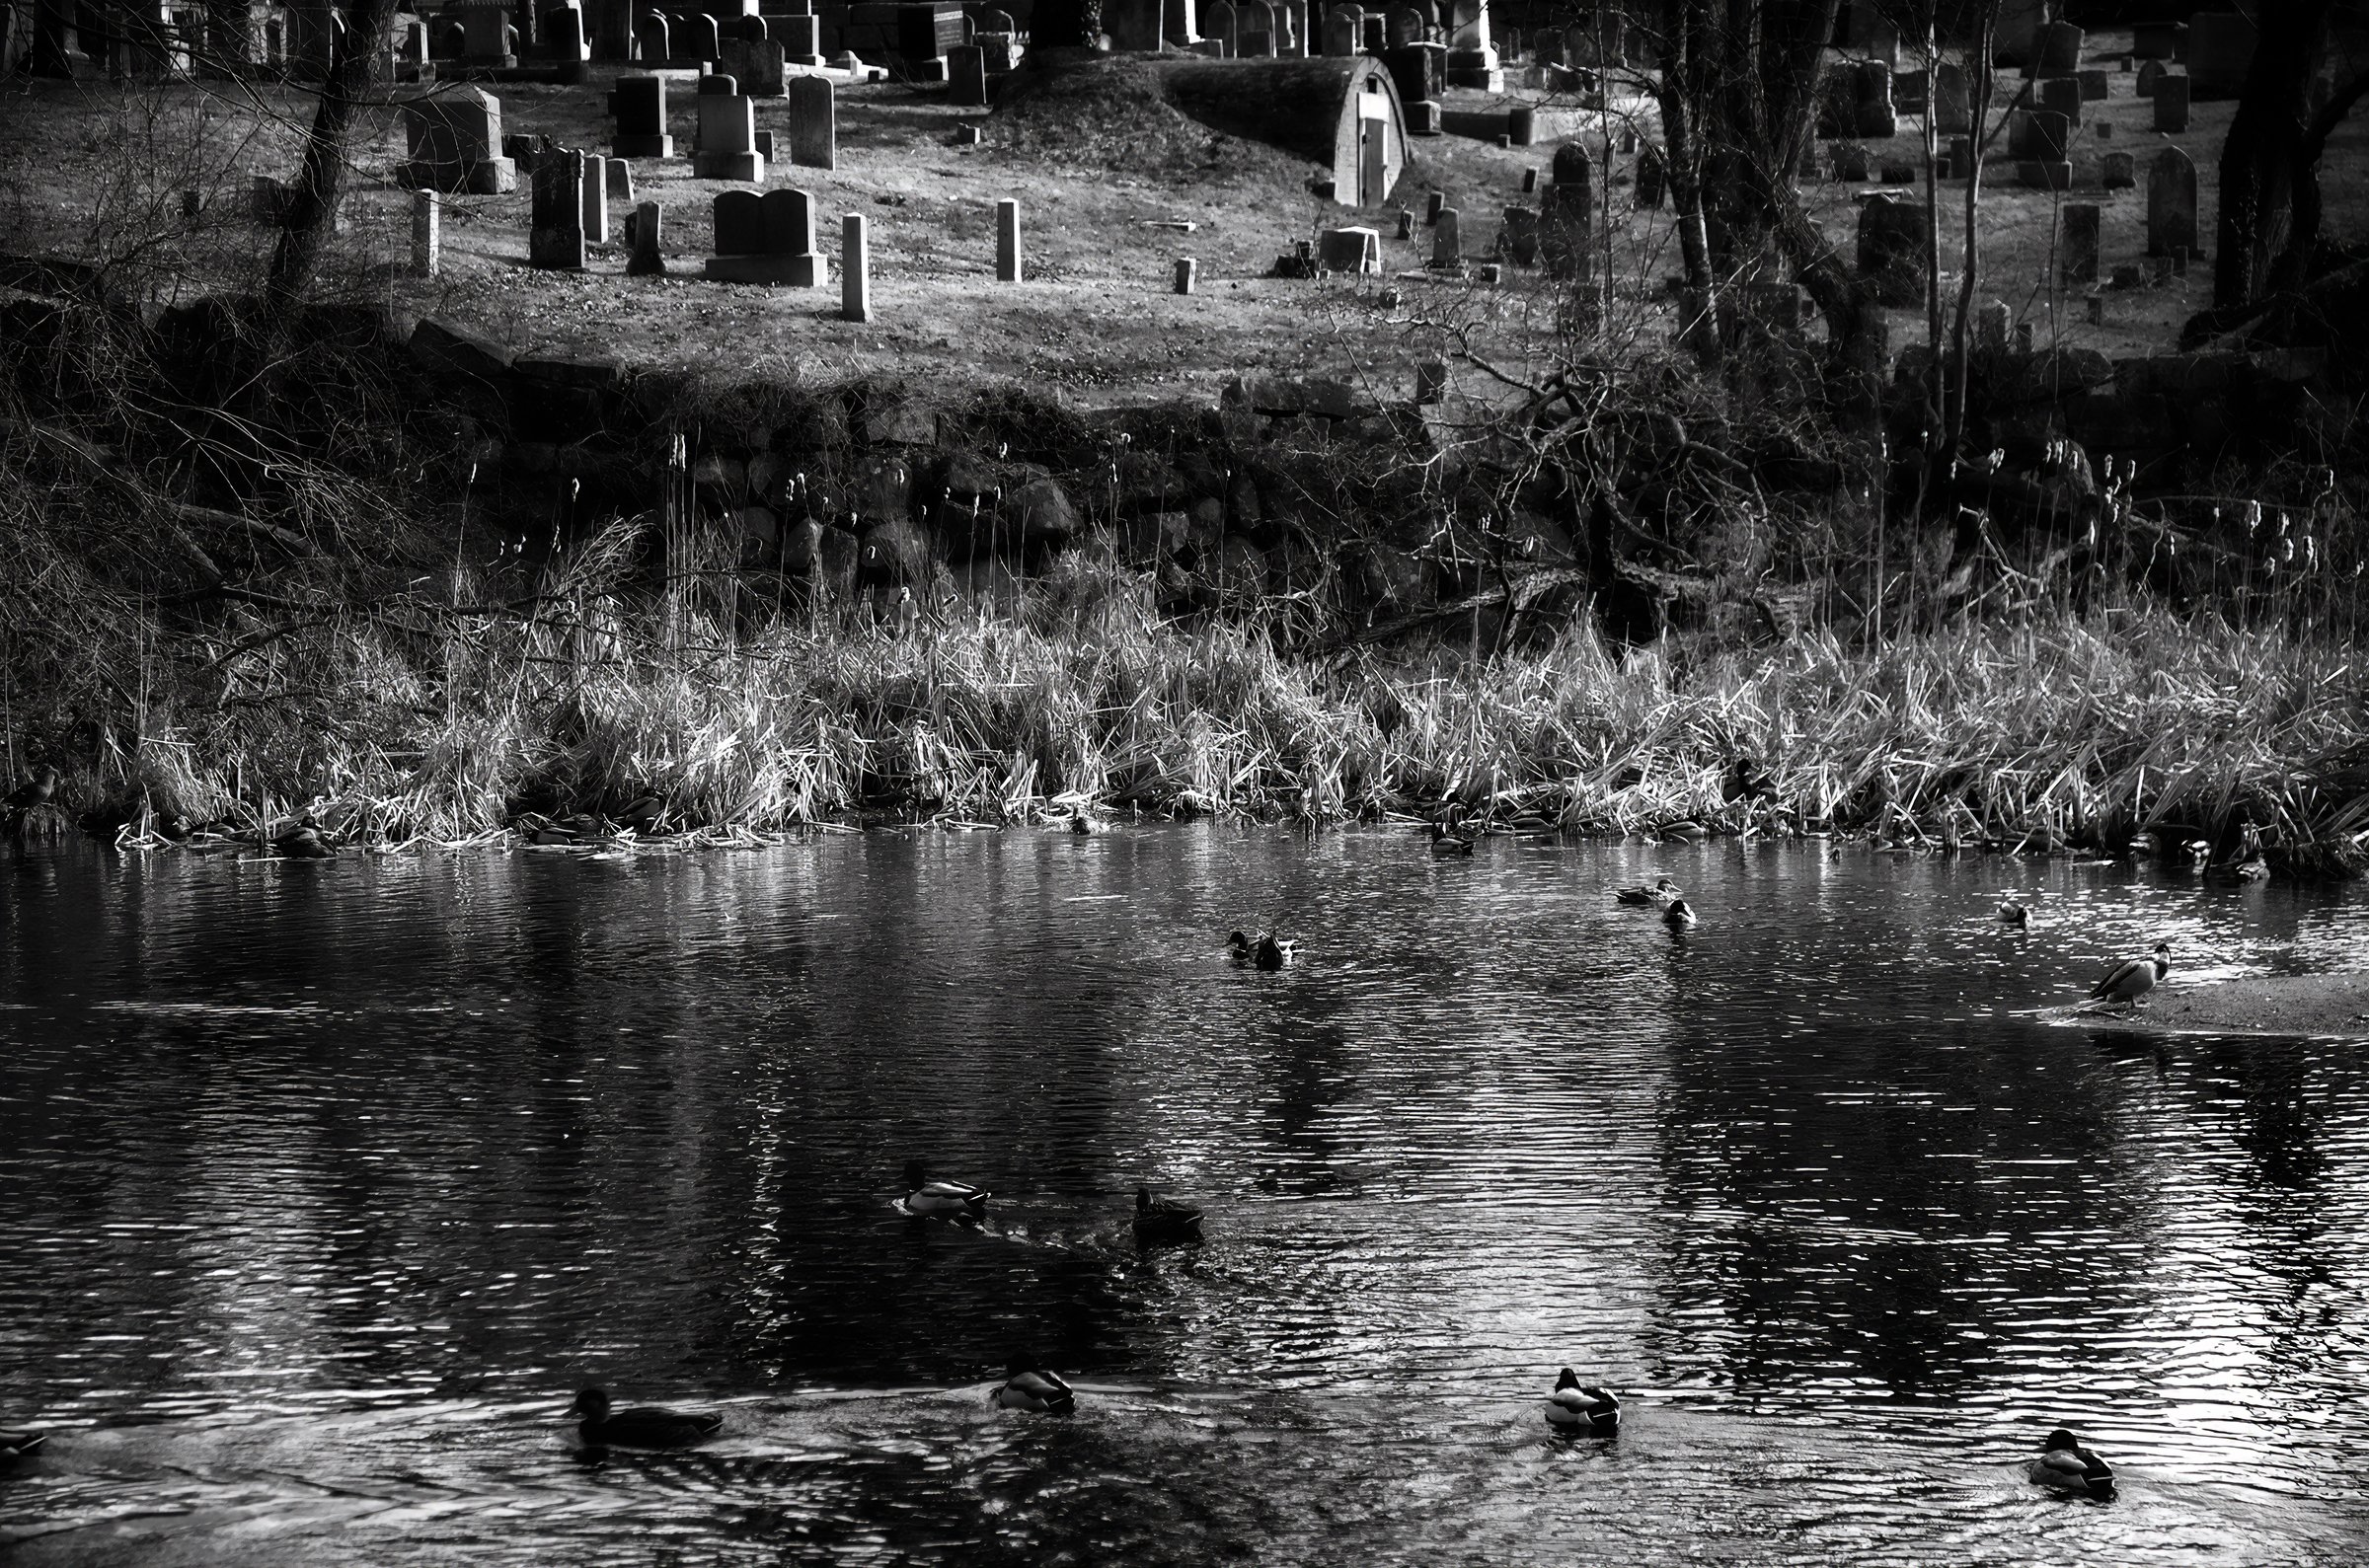 Ducks and the Dead